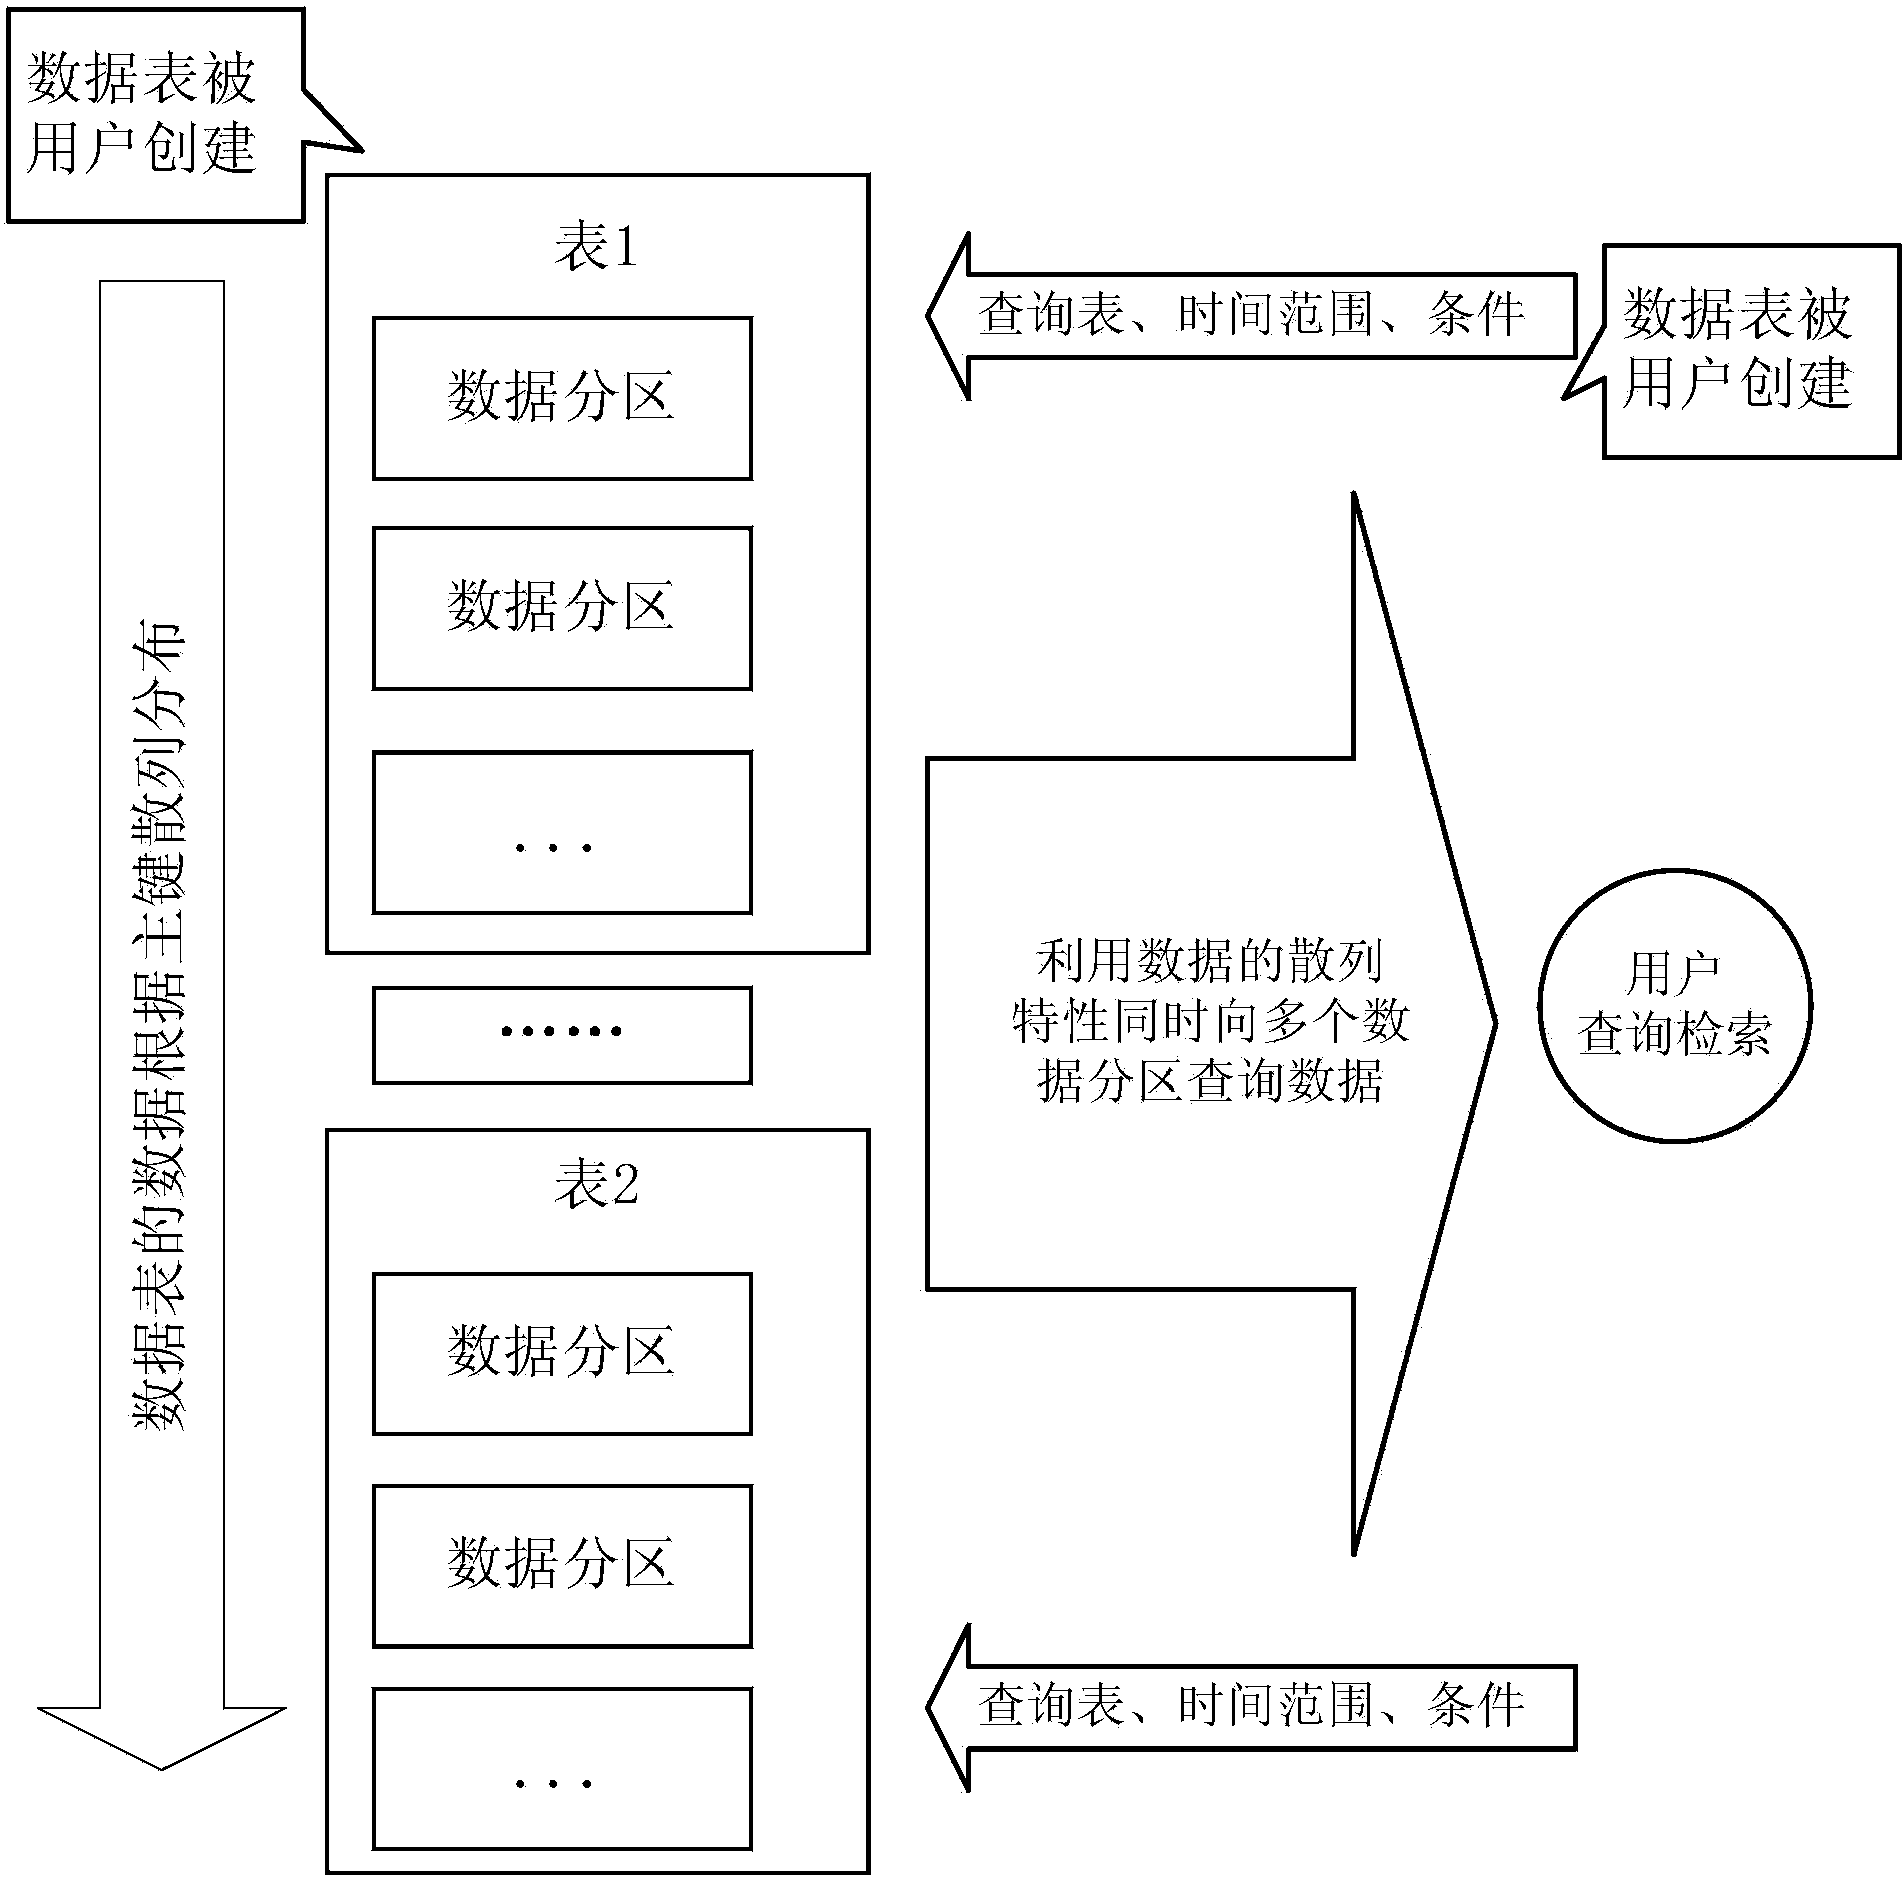 Data structure based on cloud computing database system